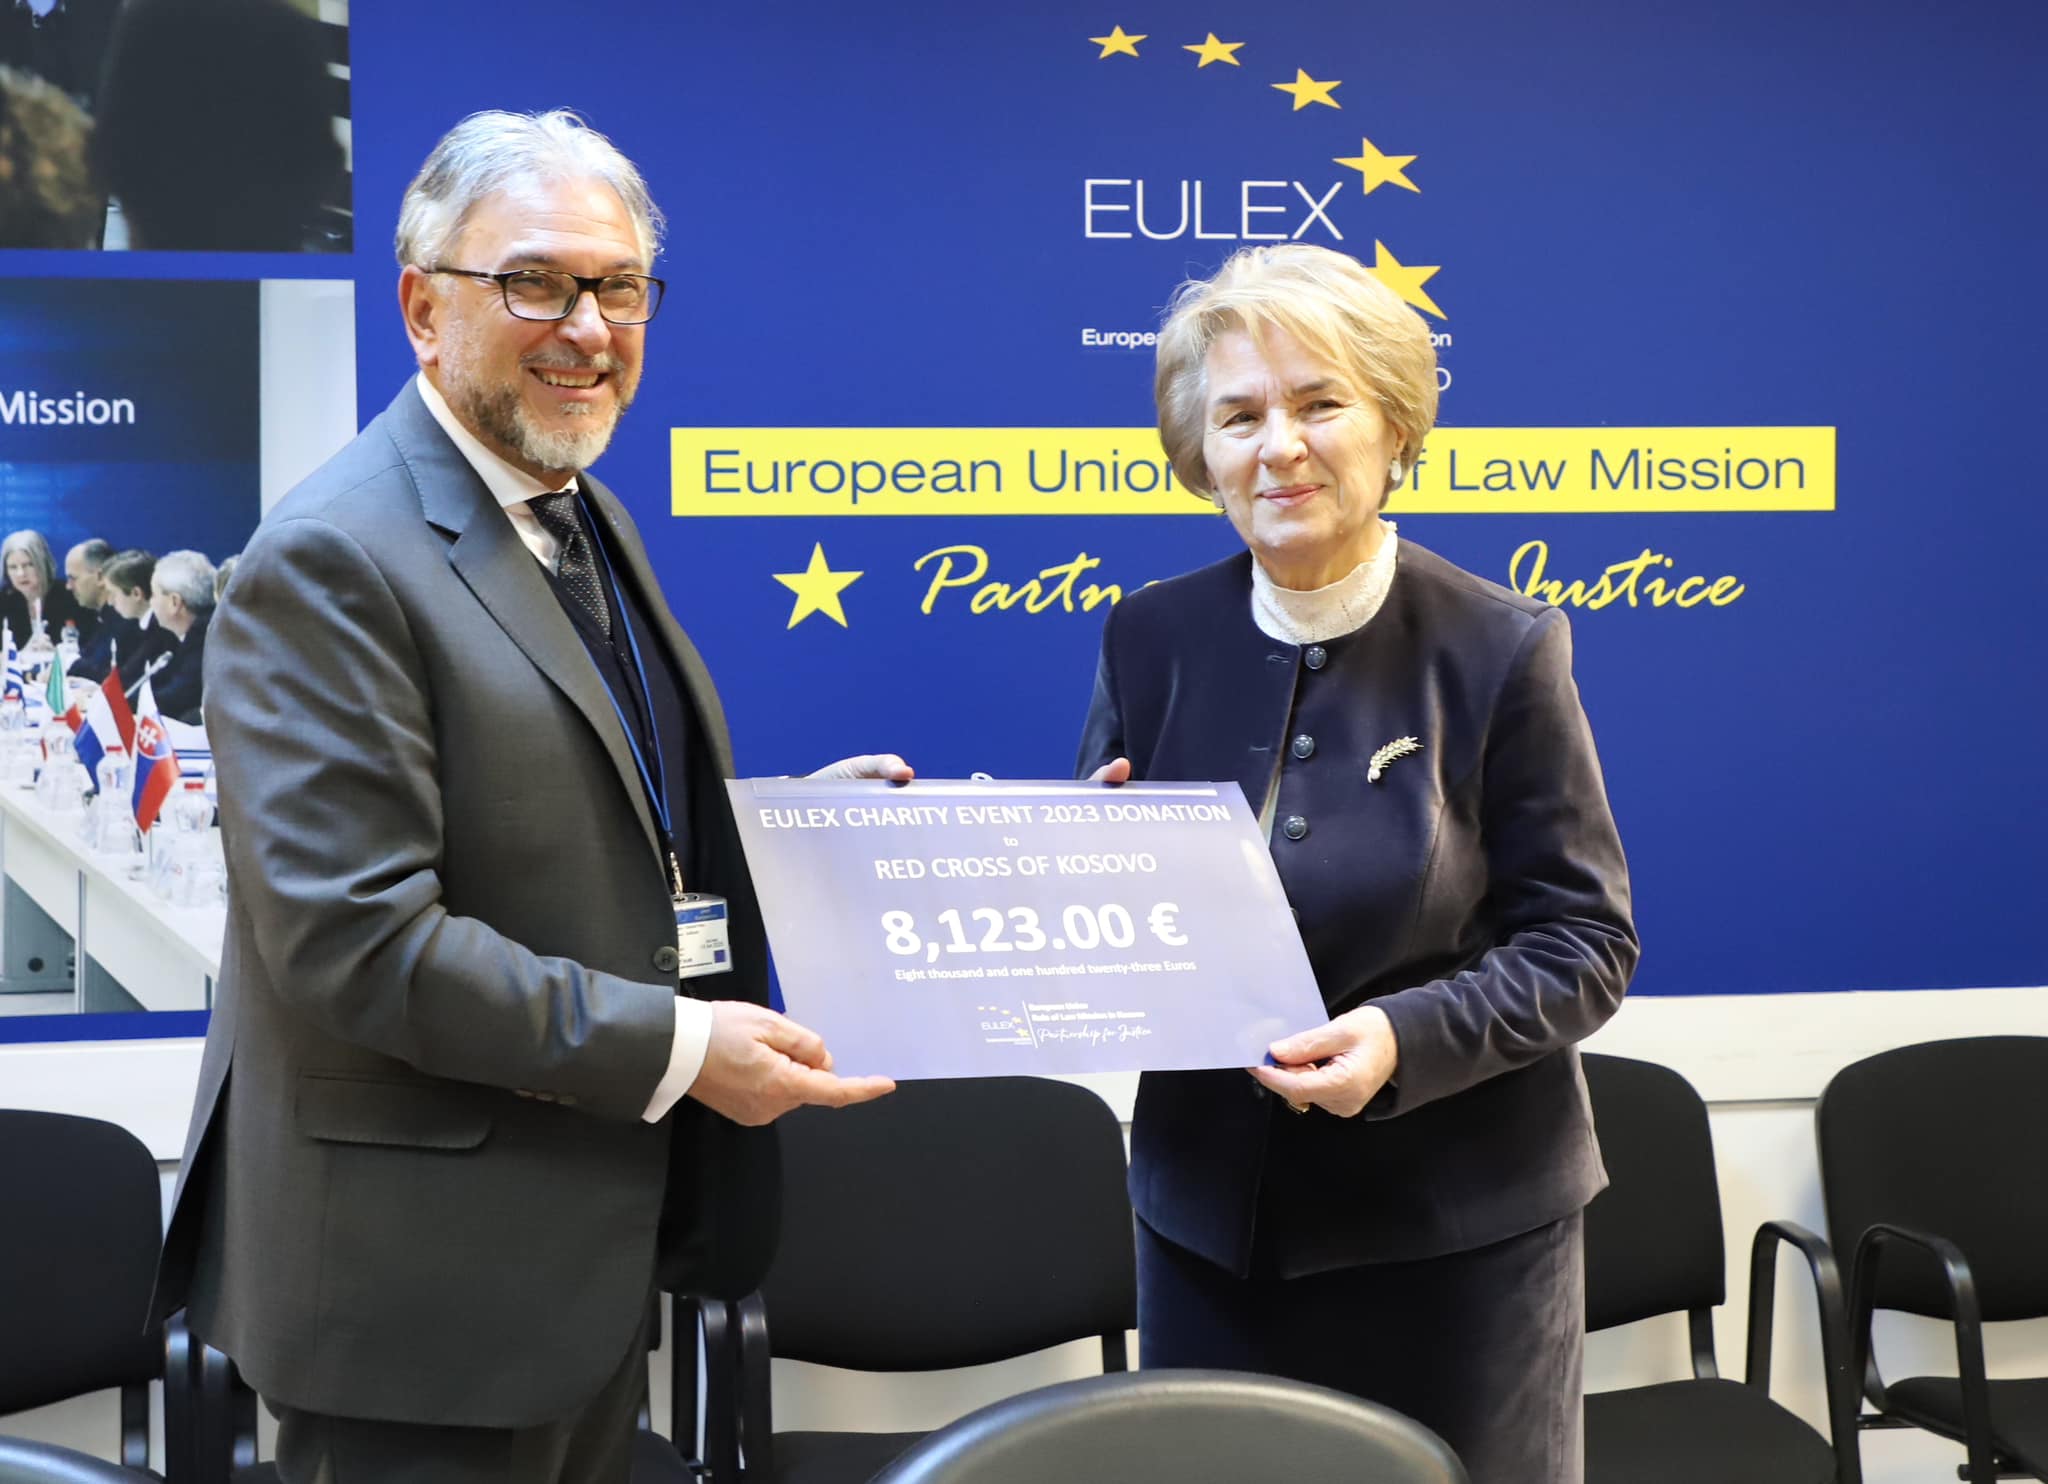 EULEX Charity Event’s Donation to Red Cross of Kosovo